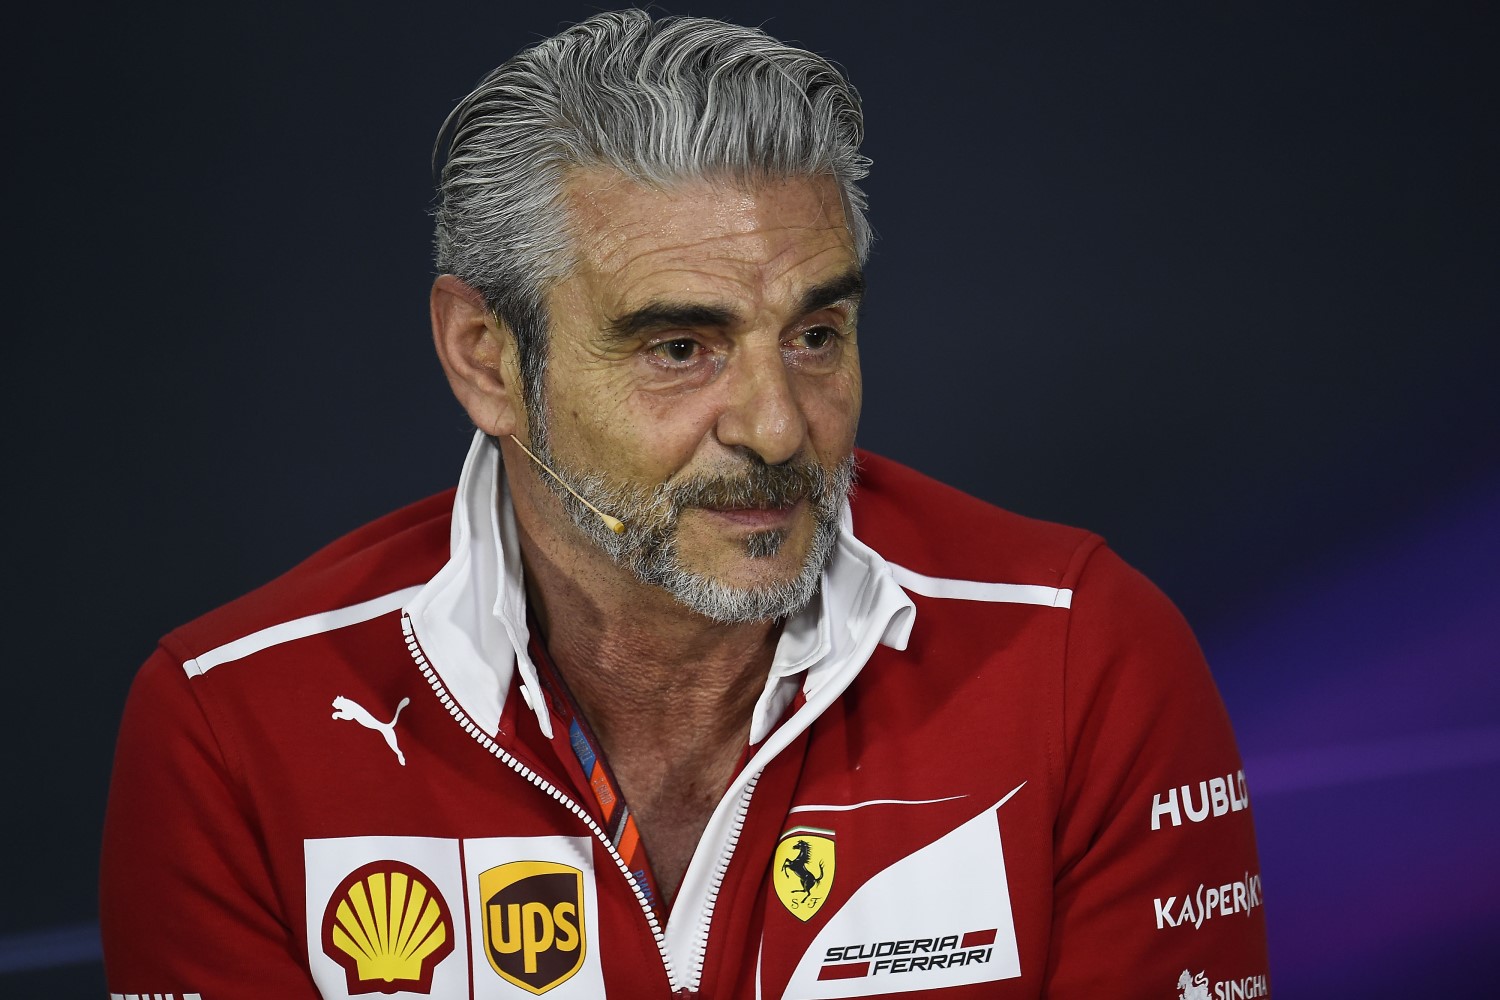 Arrivabene is right , Ferrari does not need a 'revolution', it just needs its designer Aldo Costa back from Mercedes